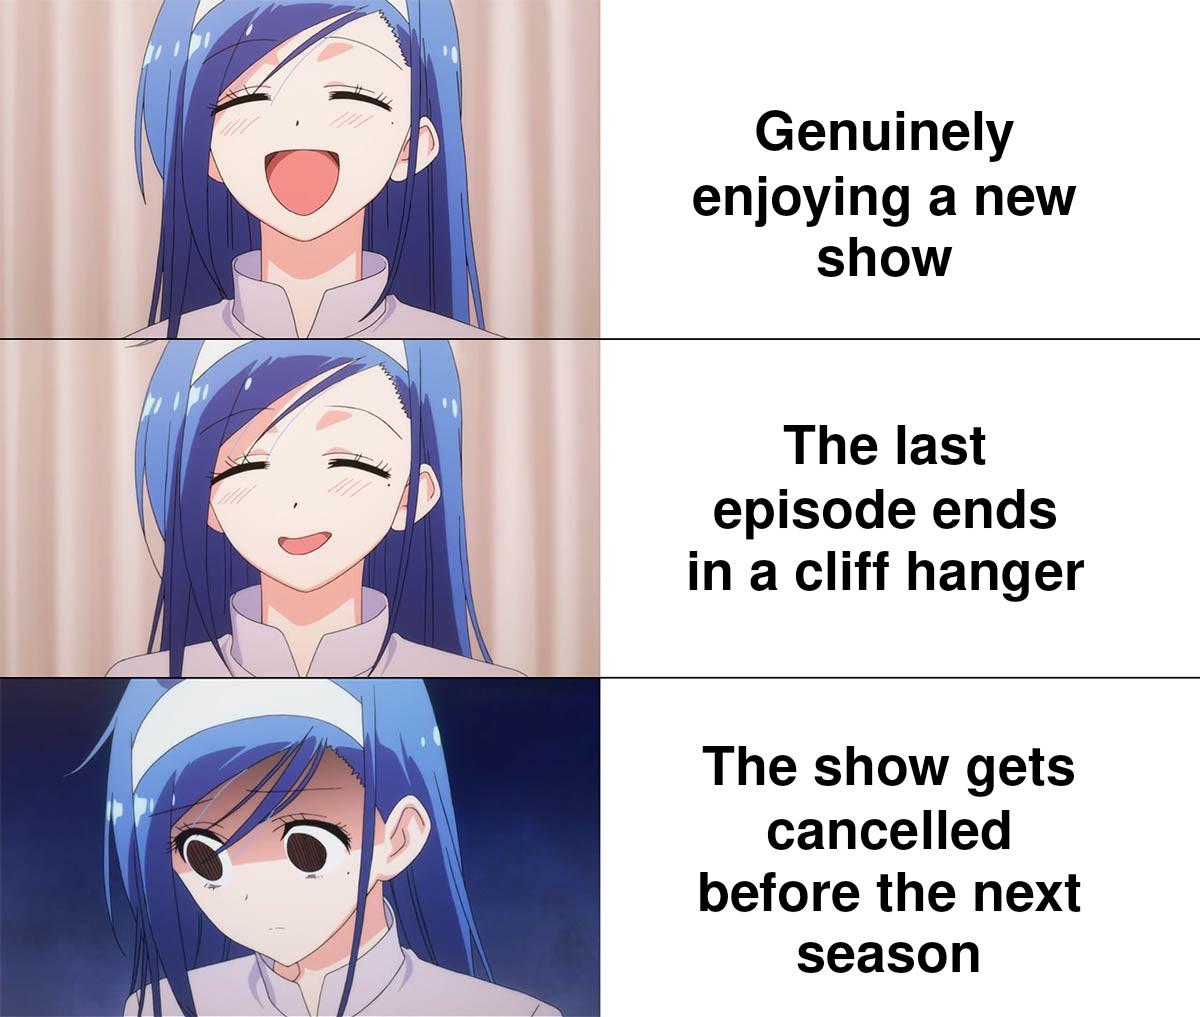 funny memes and pics - transfem memes - Genuinely enjoying a new show The last episode ends in a cliff hanger The show gets cancelled before the next season